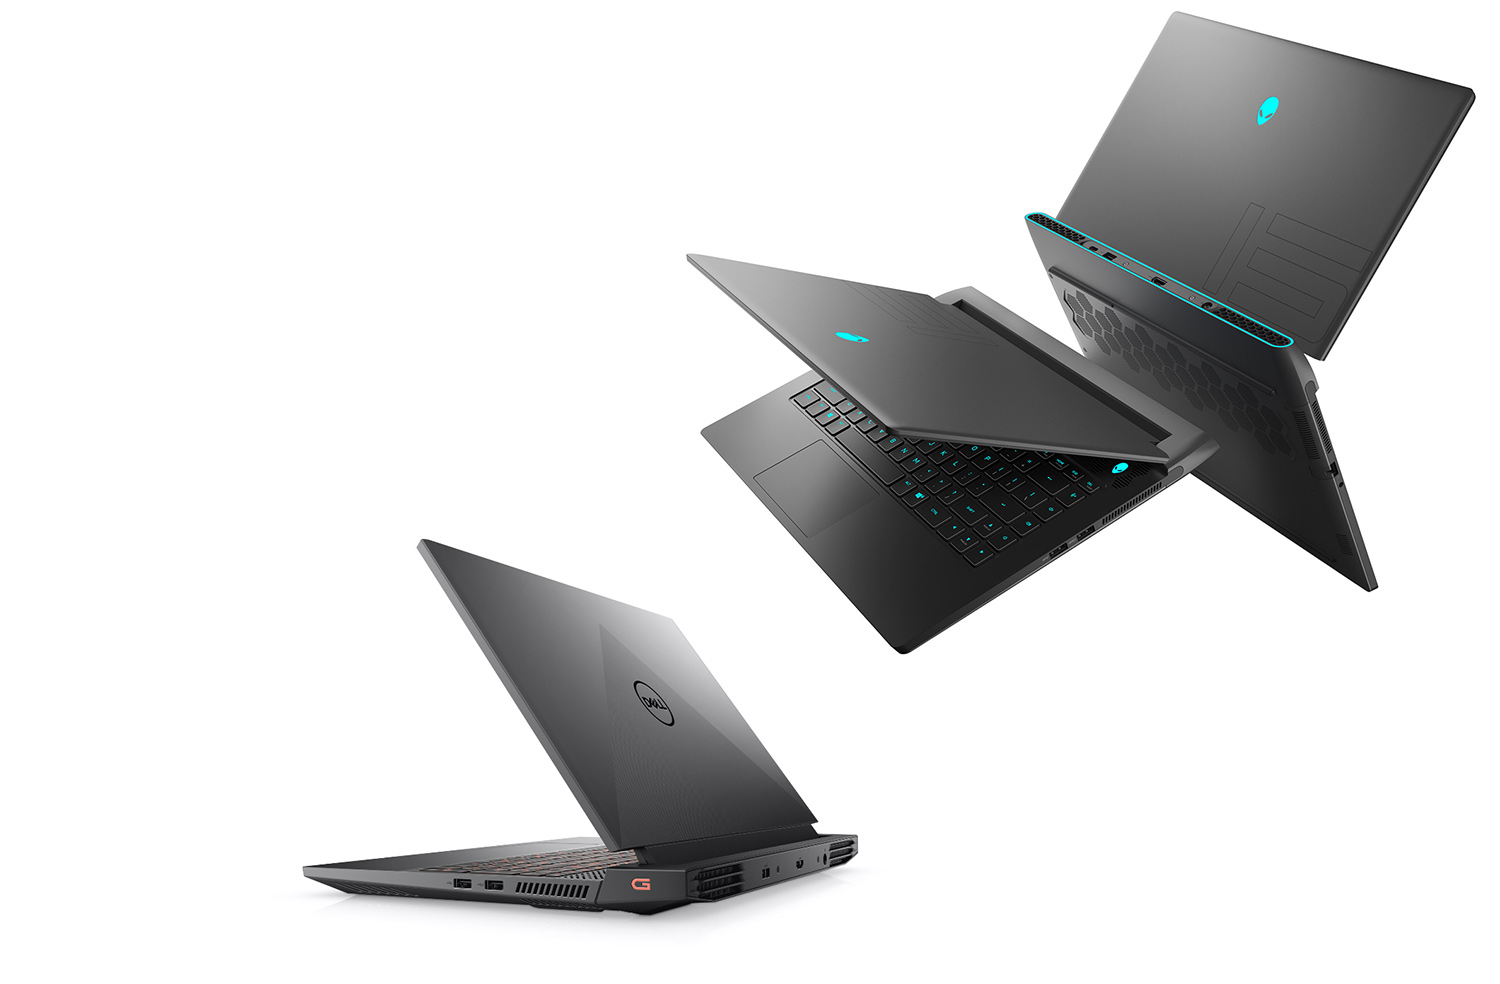 Alienware Gaming PC Overview